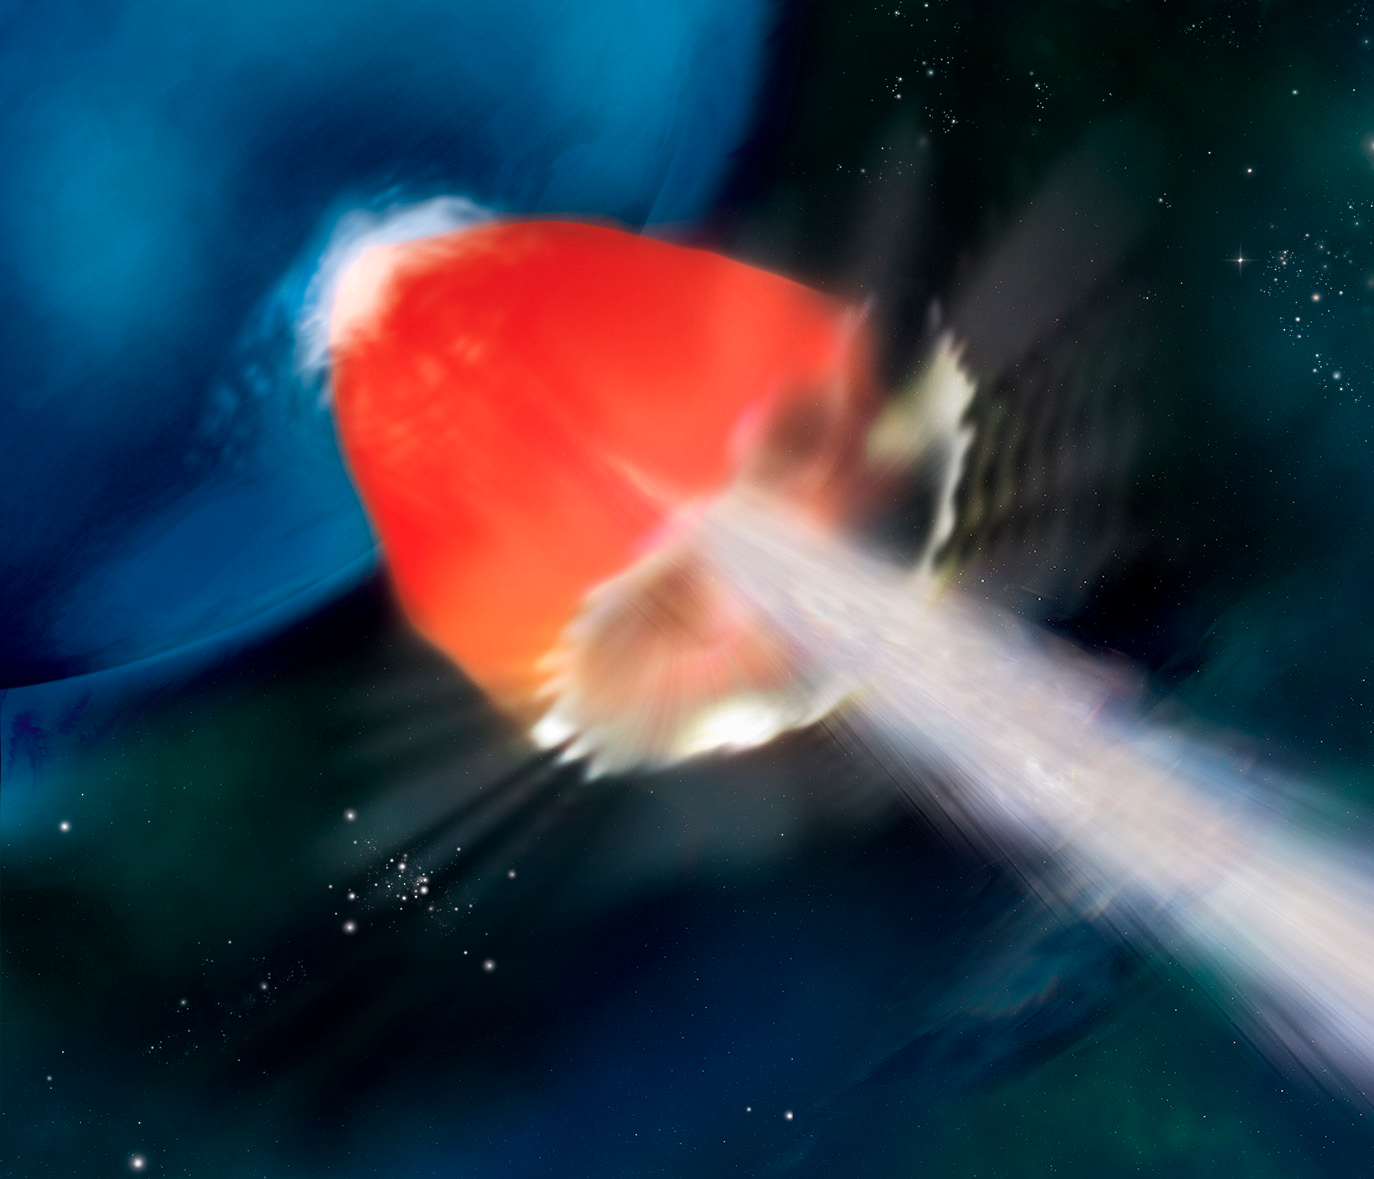 Artistic picture shows the jet piercing through the surface with an associated hot cocoon, both components producing X-ray emission. The figure shows Ultralong GRB light curves as opposed to normal GRB population in gray.